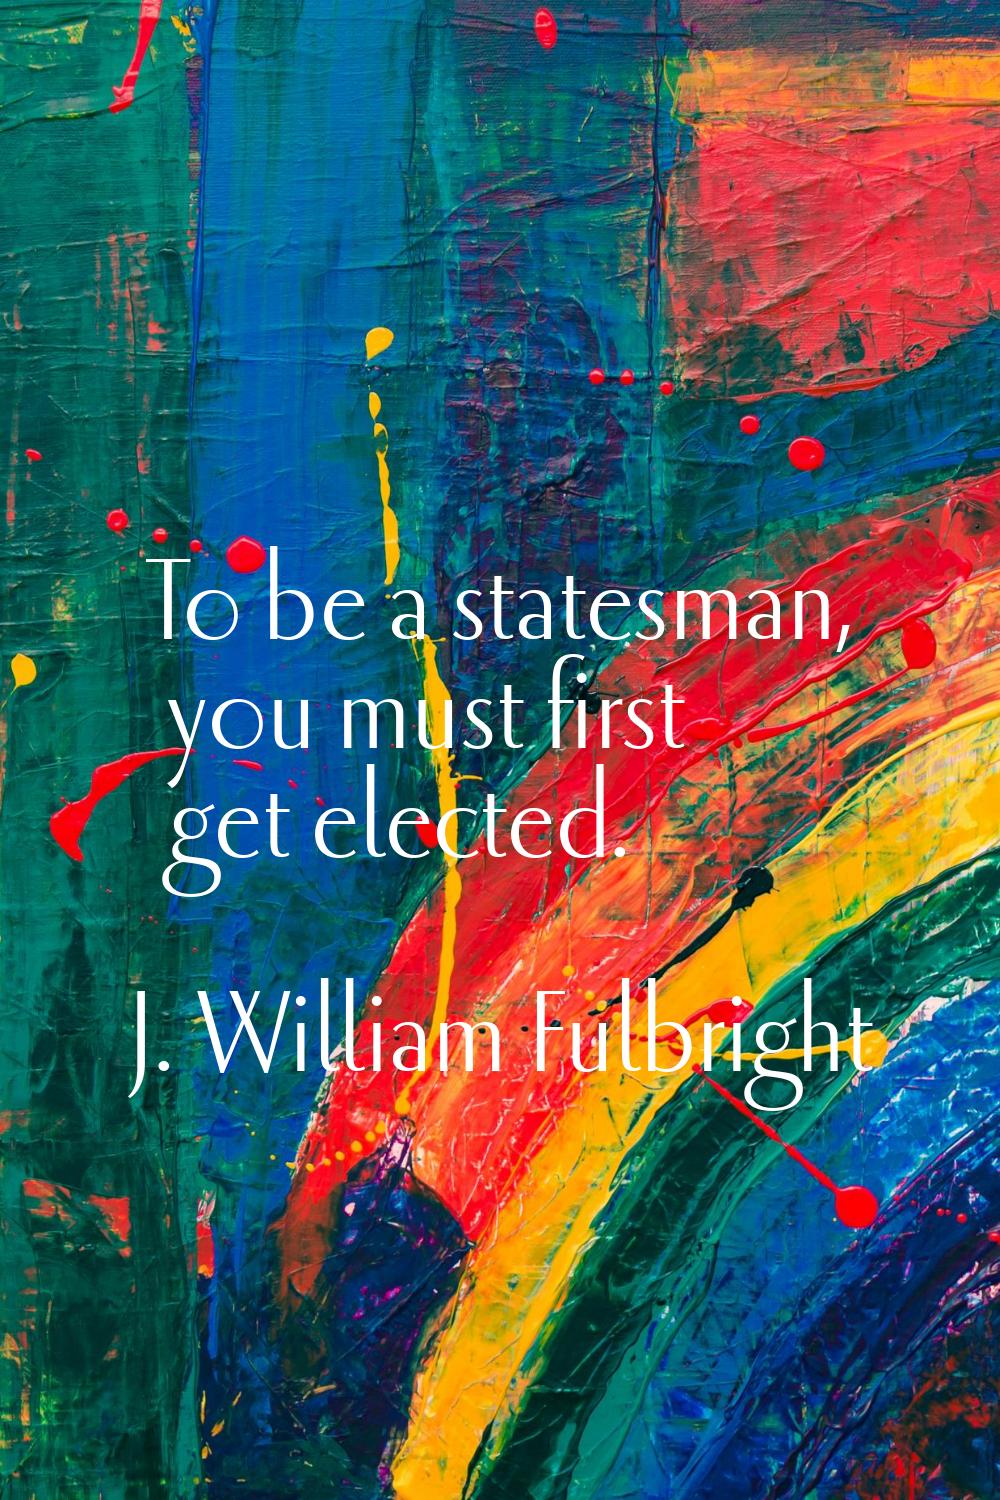 To be a statesman, you must first get elected.